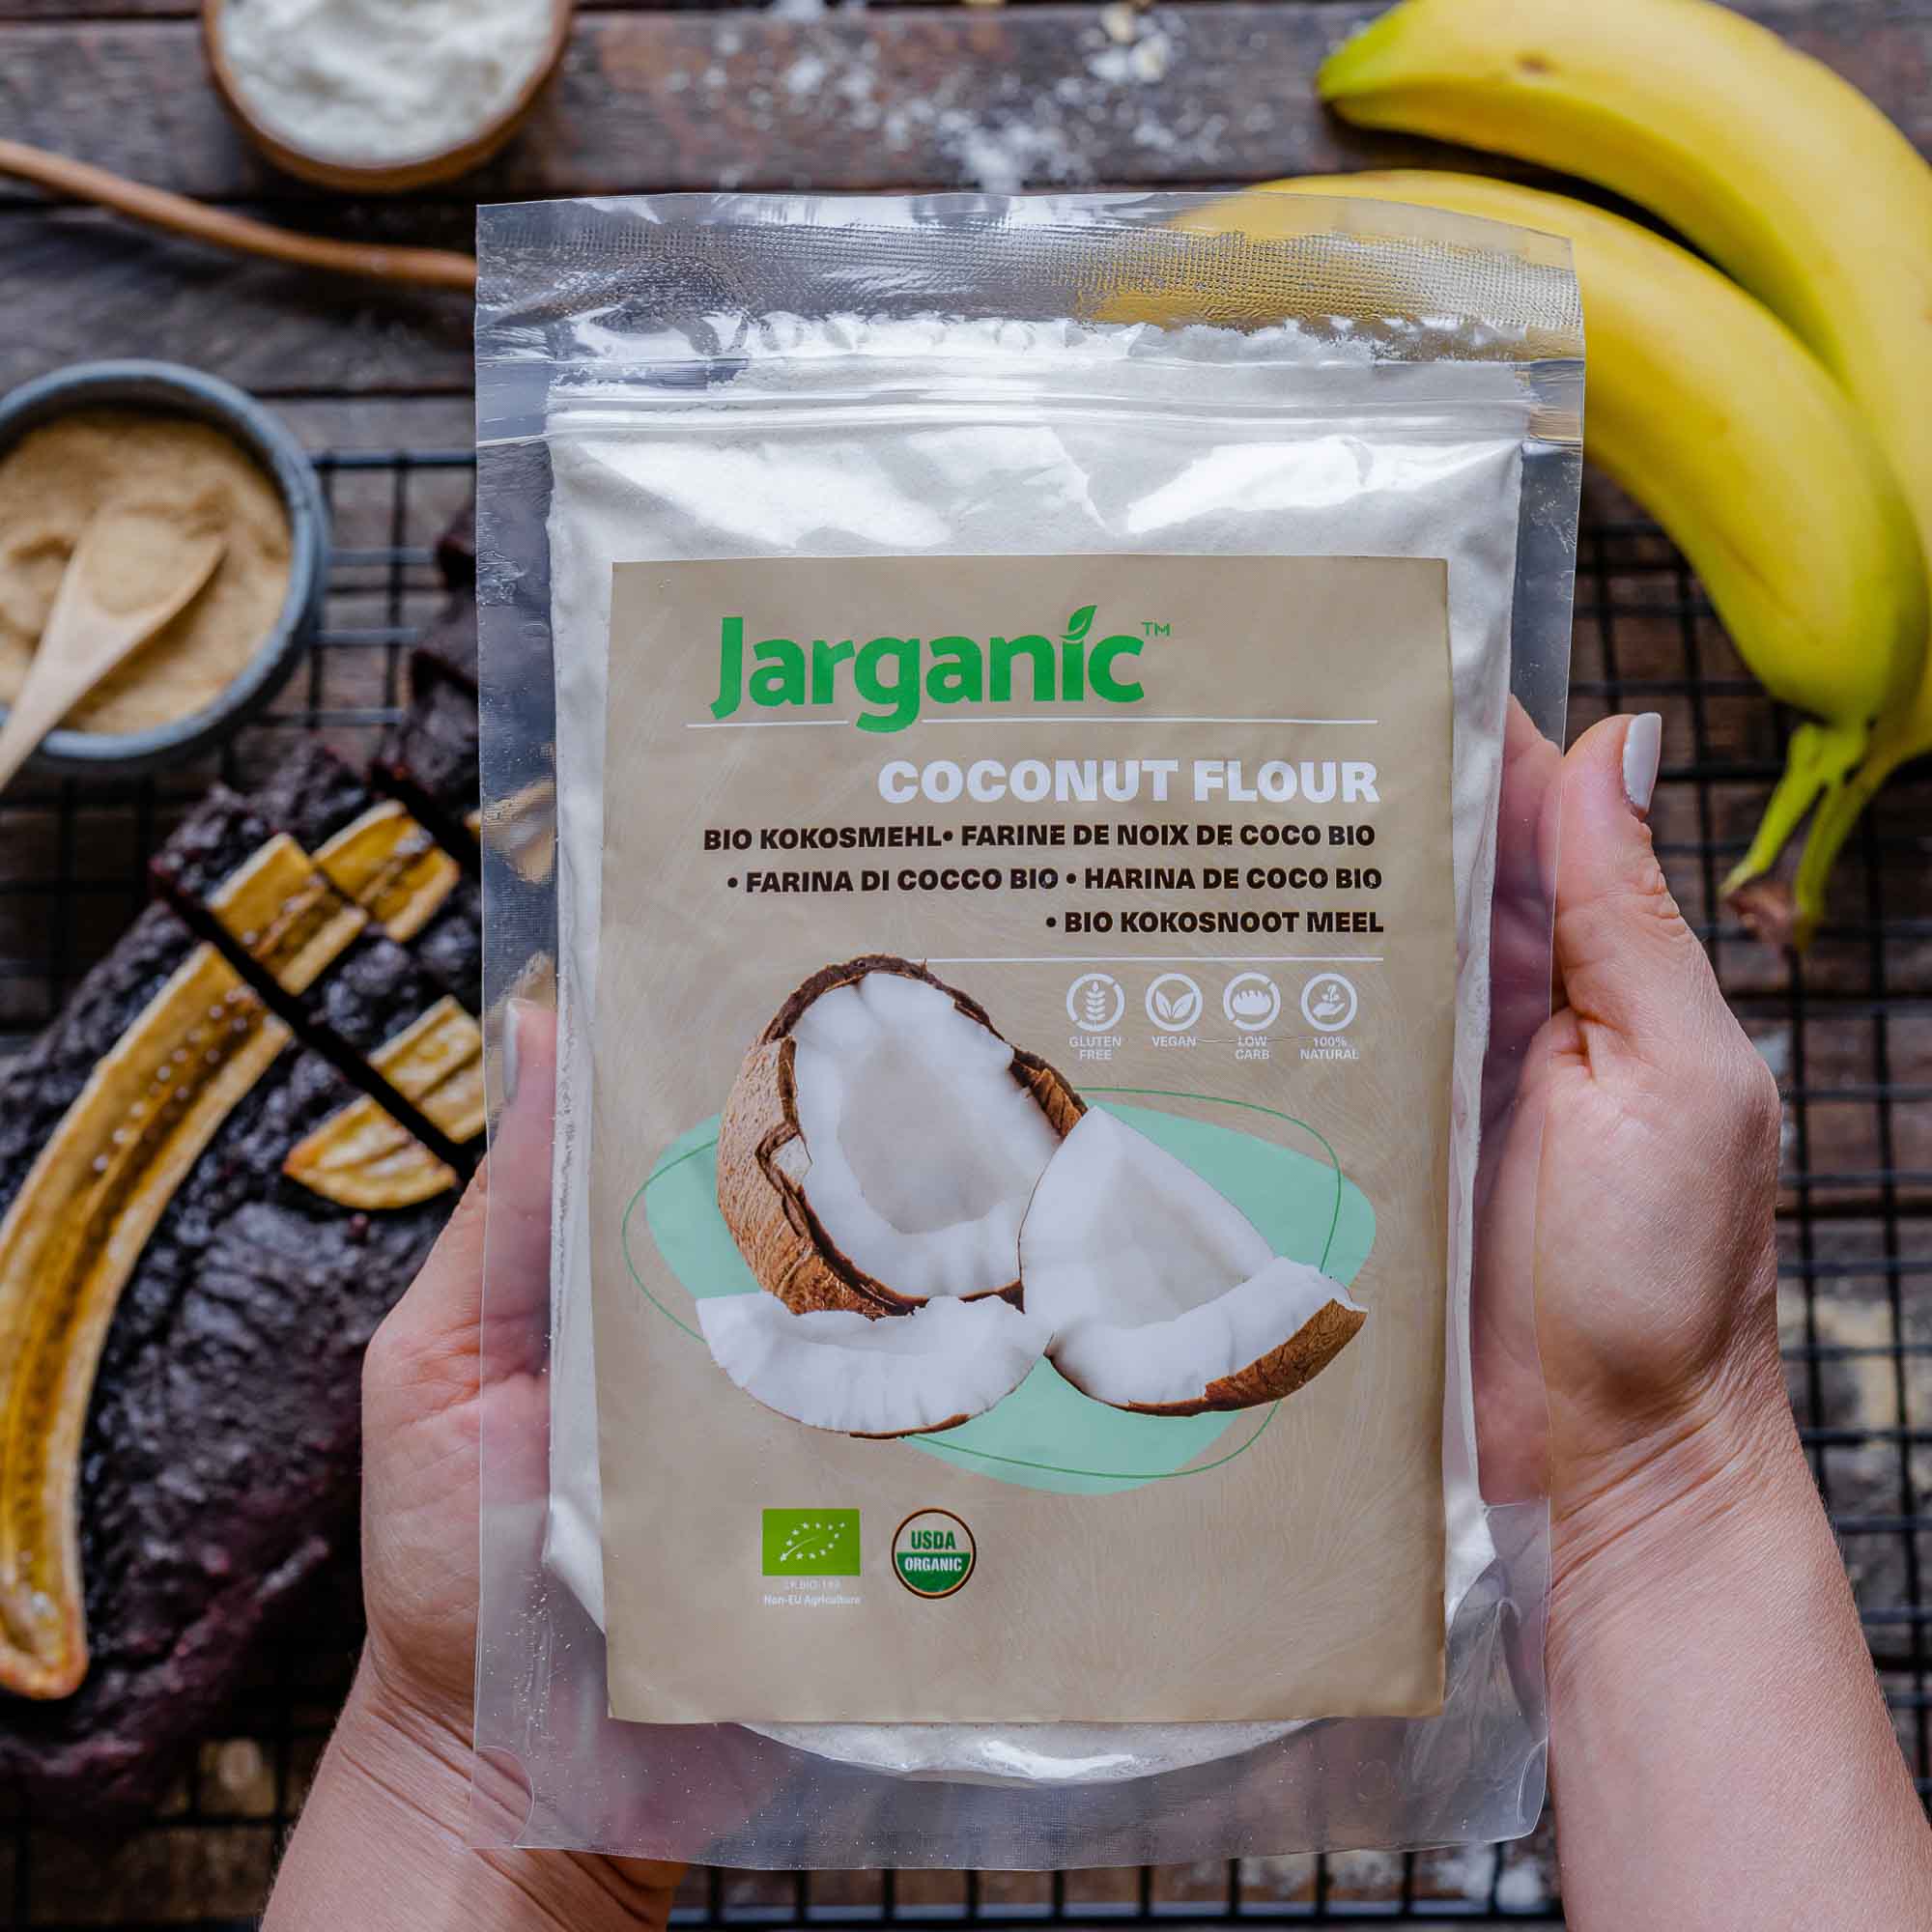 A pack of organic coconut flour